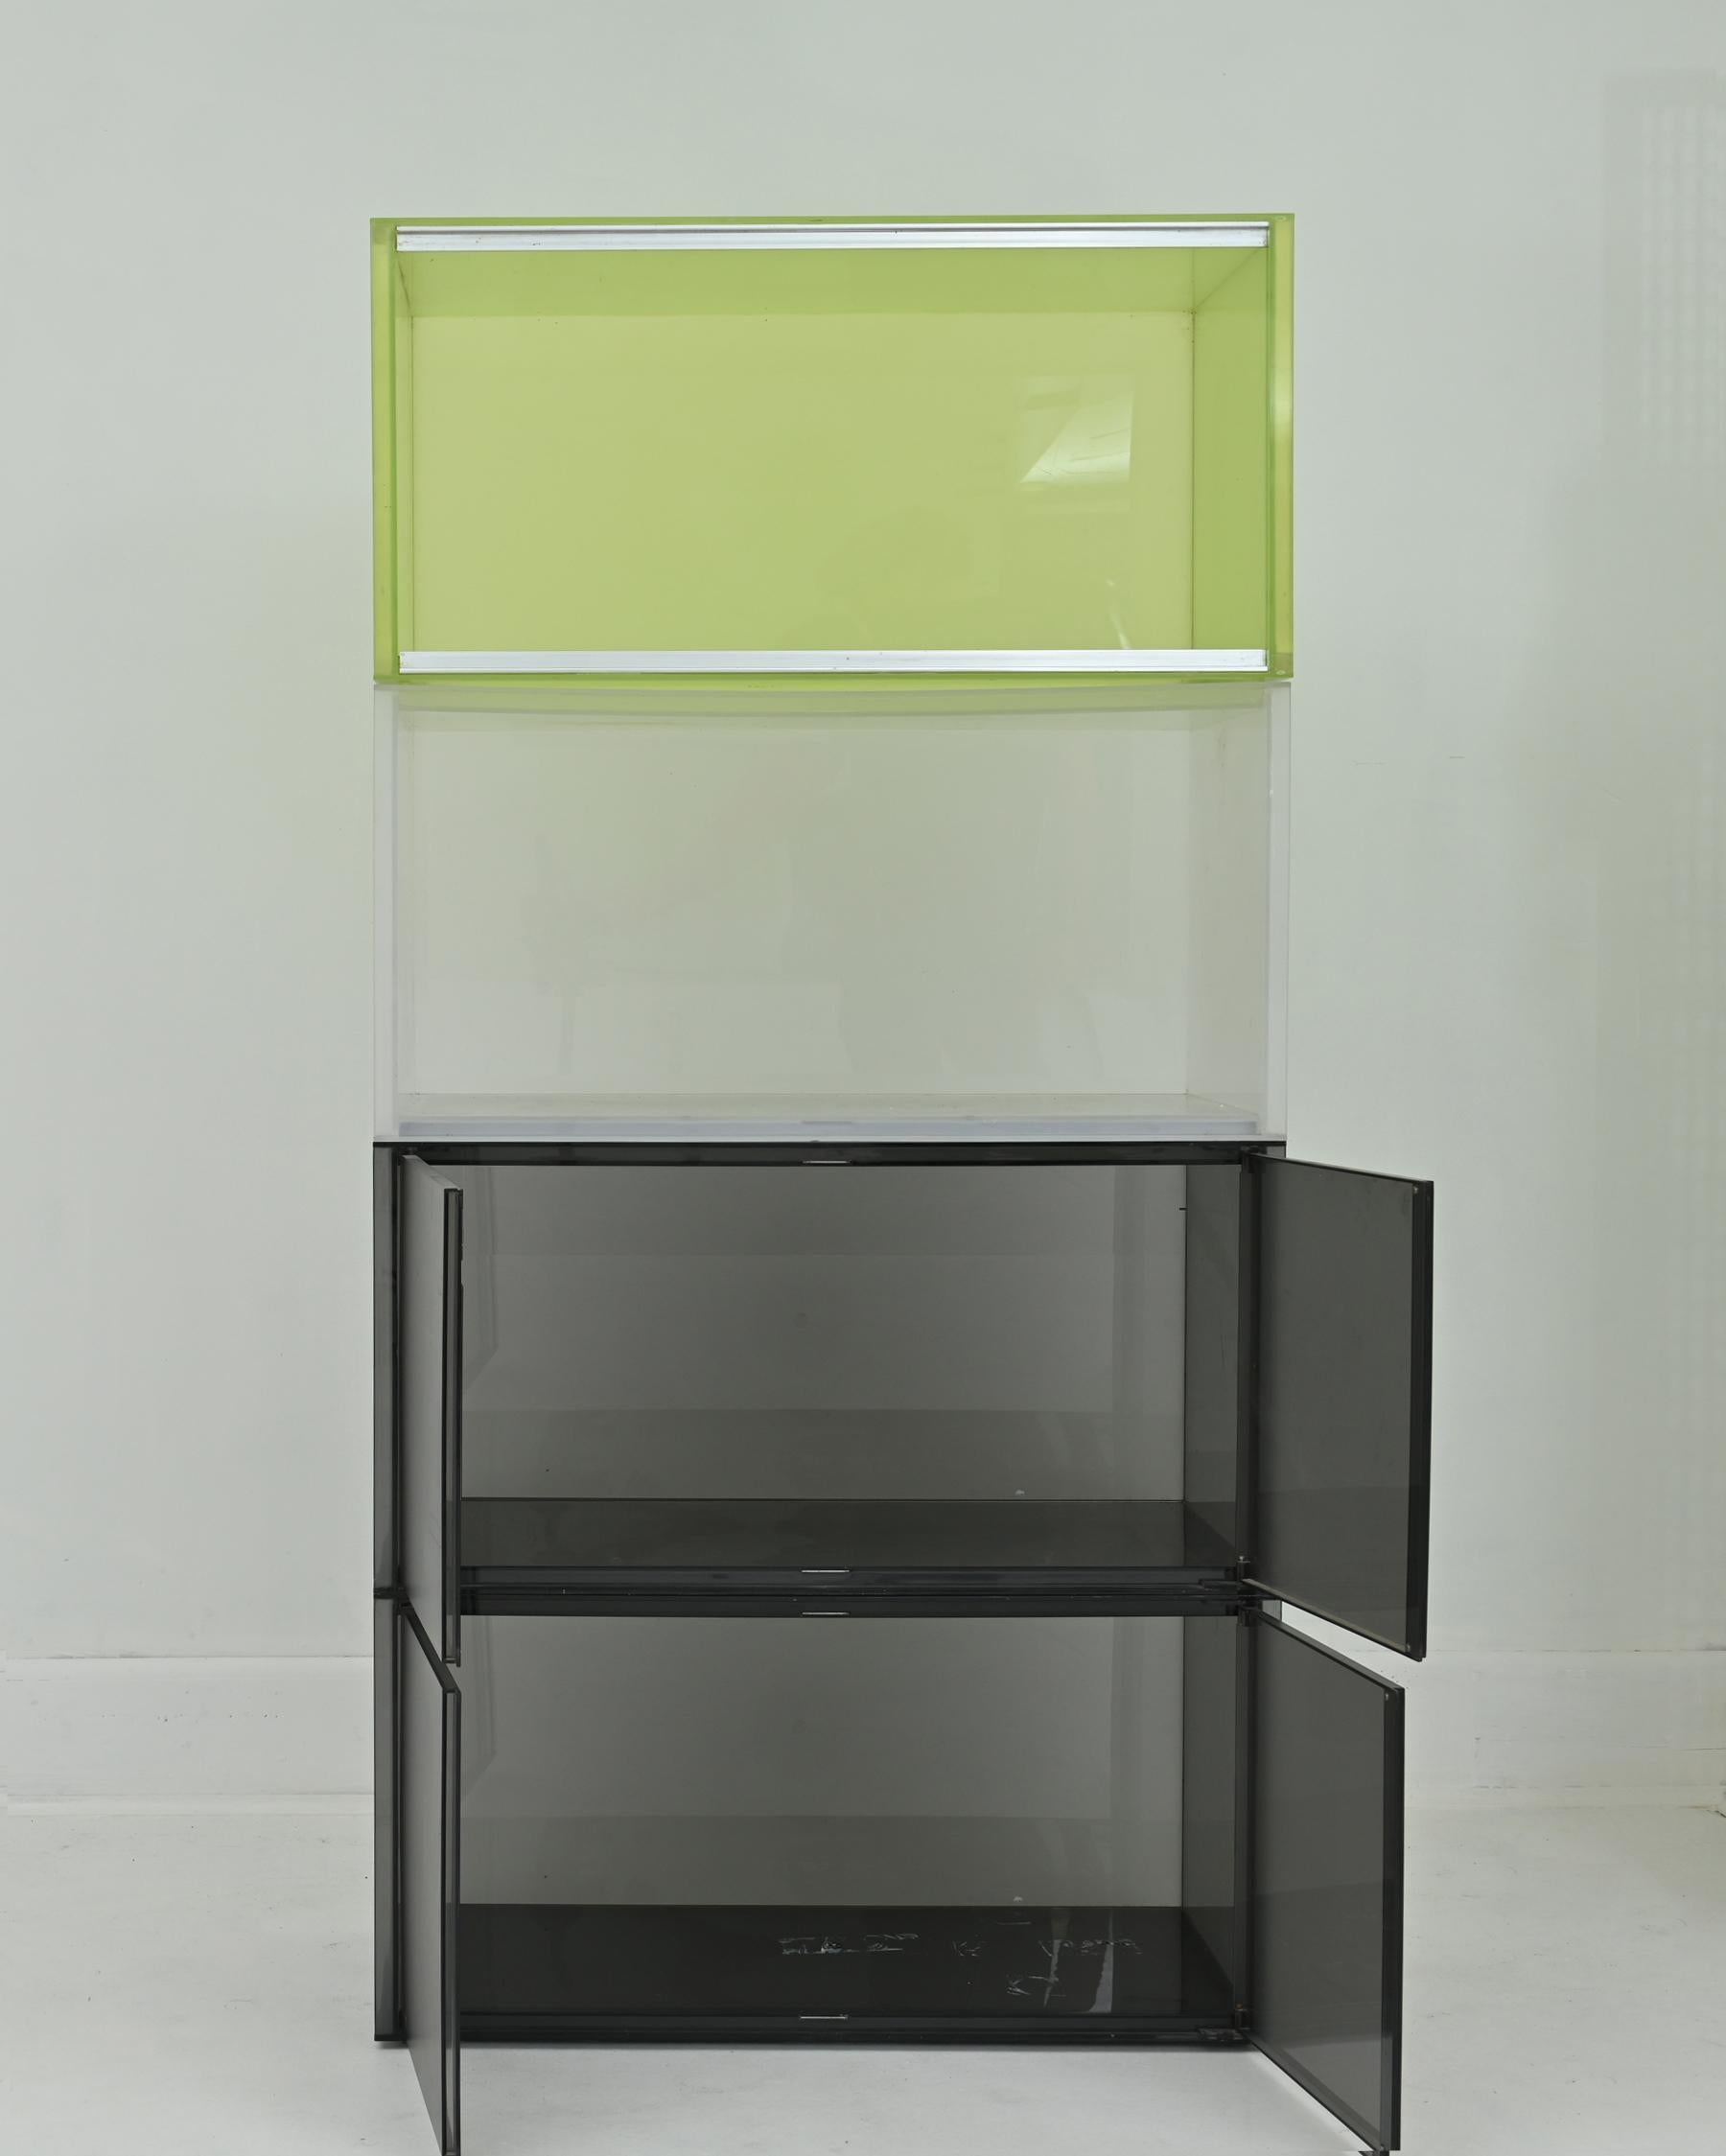 Italian 1990s Acrylic Resin and Steel “One” Wall Unit by Piero Lissoni for Kartell For Sale